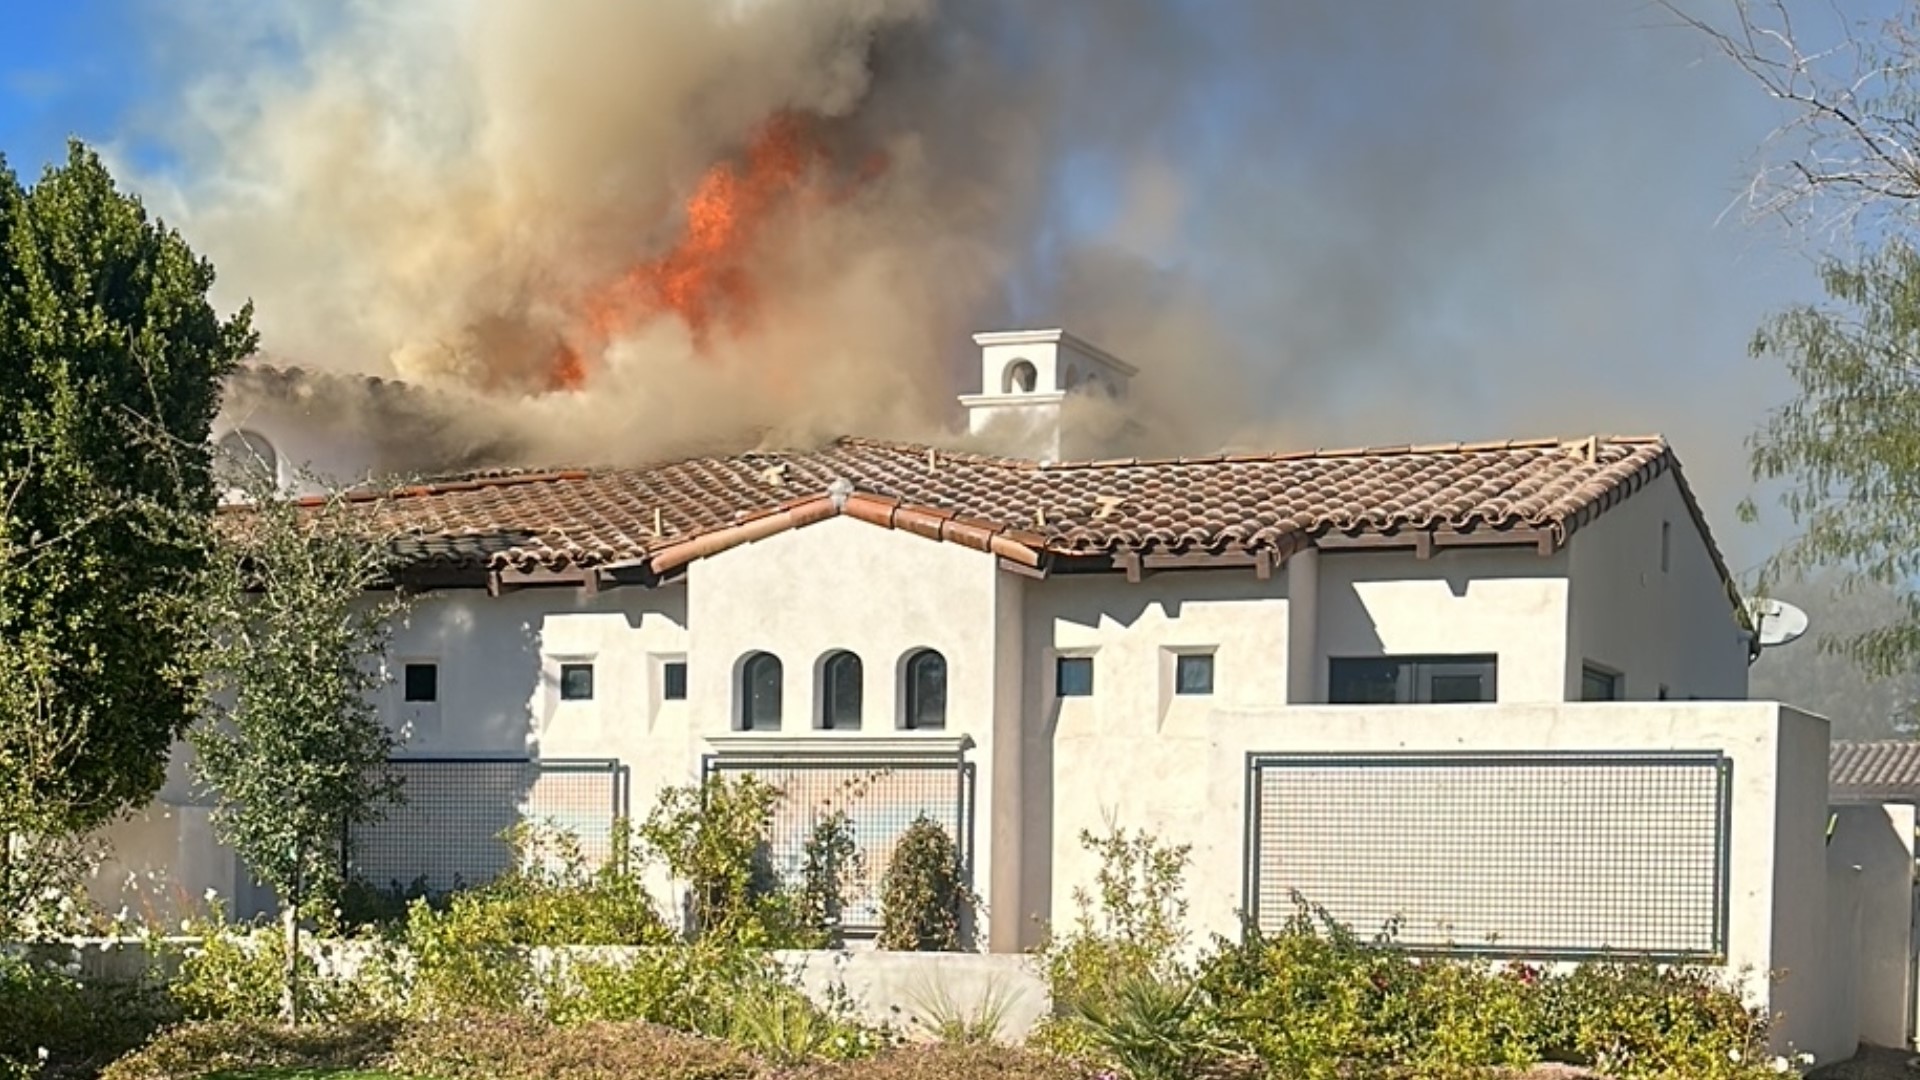 Firefighters from both Phoenix and Scottsdale put out a fire at a mansion in Paradise Valley, Arizona, on Saturday. Watch the video above for the latest information.